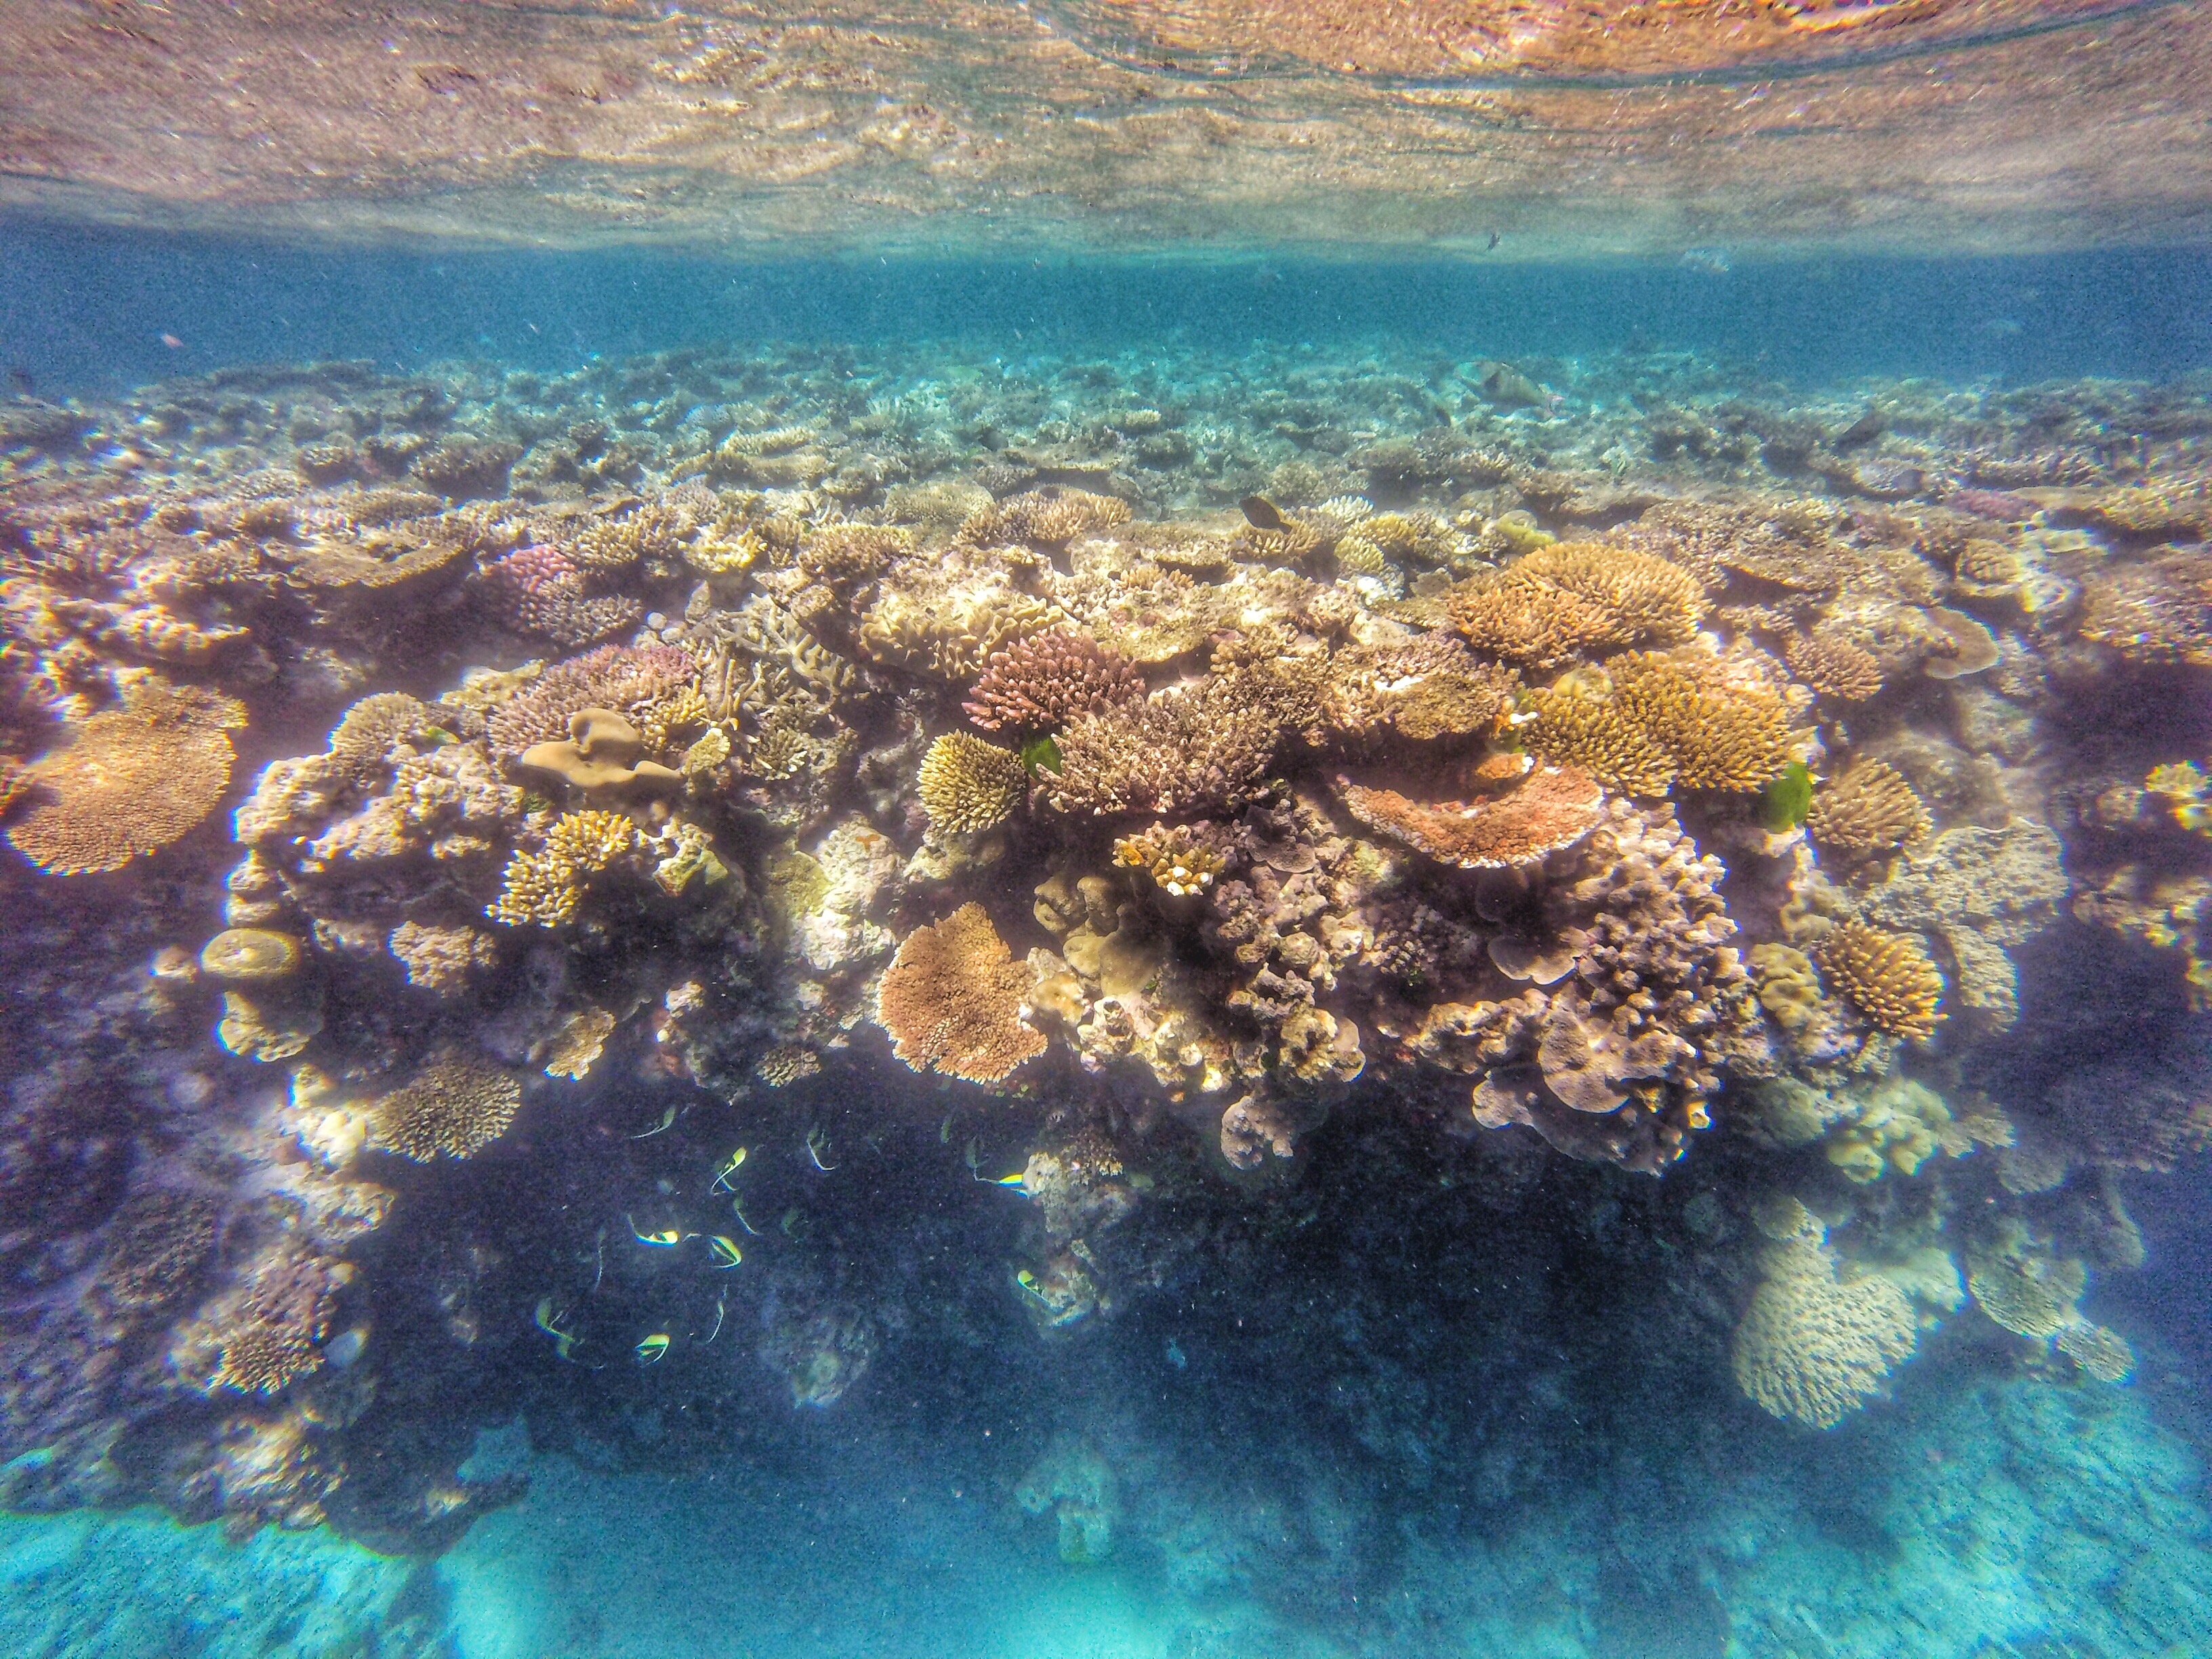 The Great Barrier Reef - Unexplored Footsteps